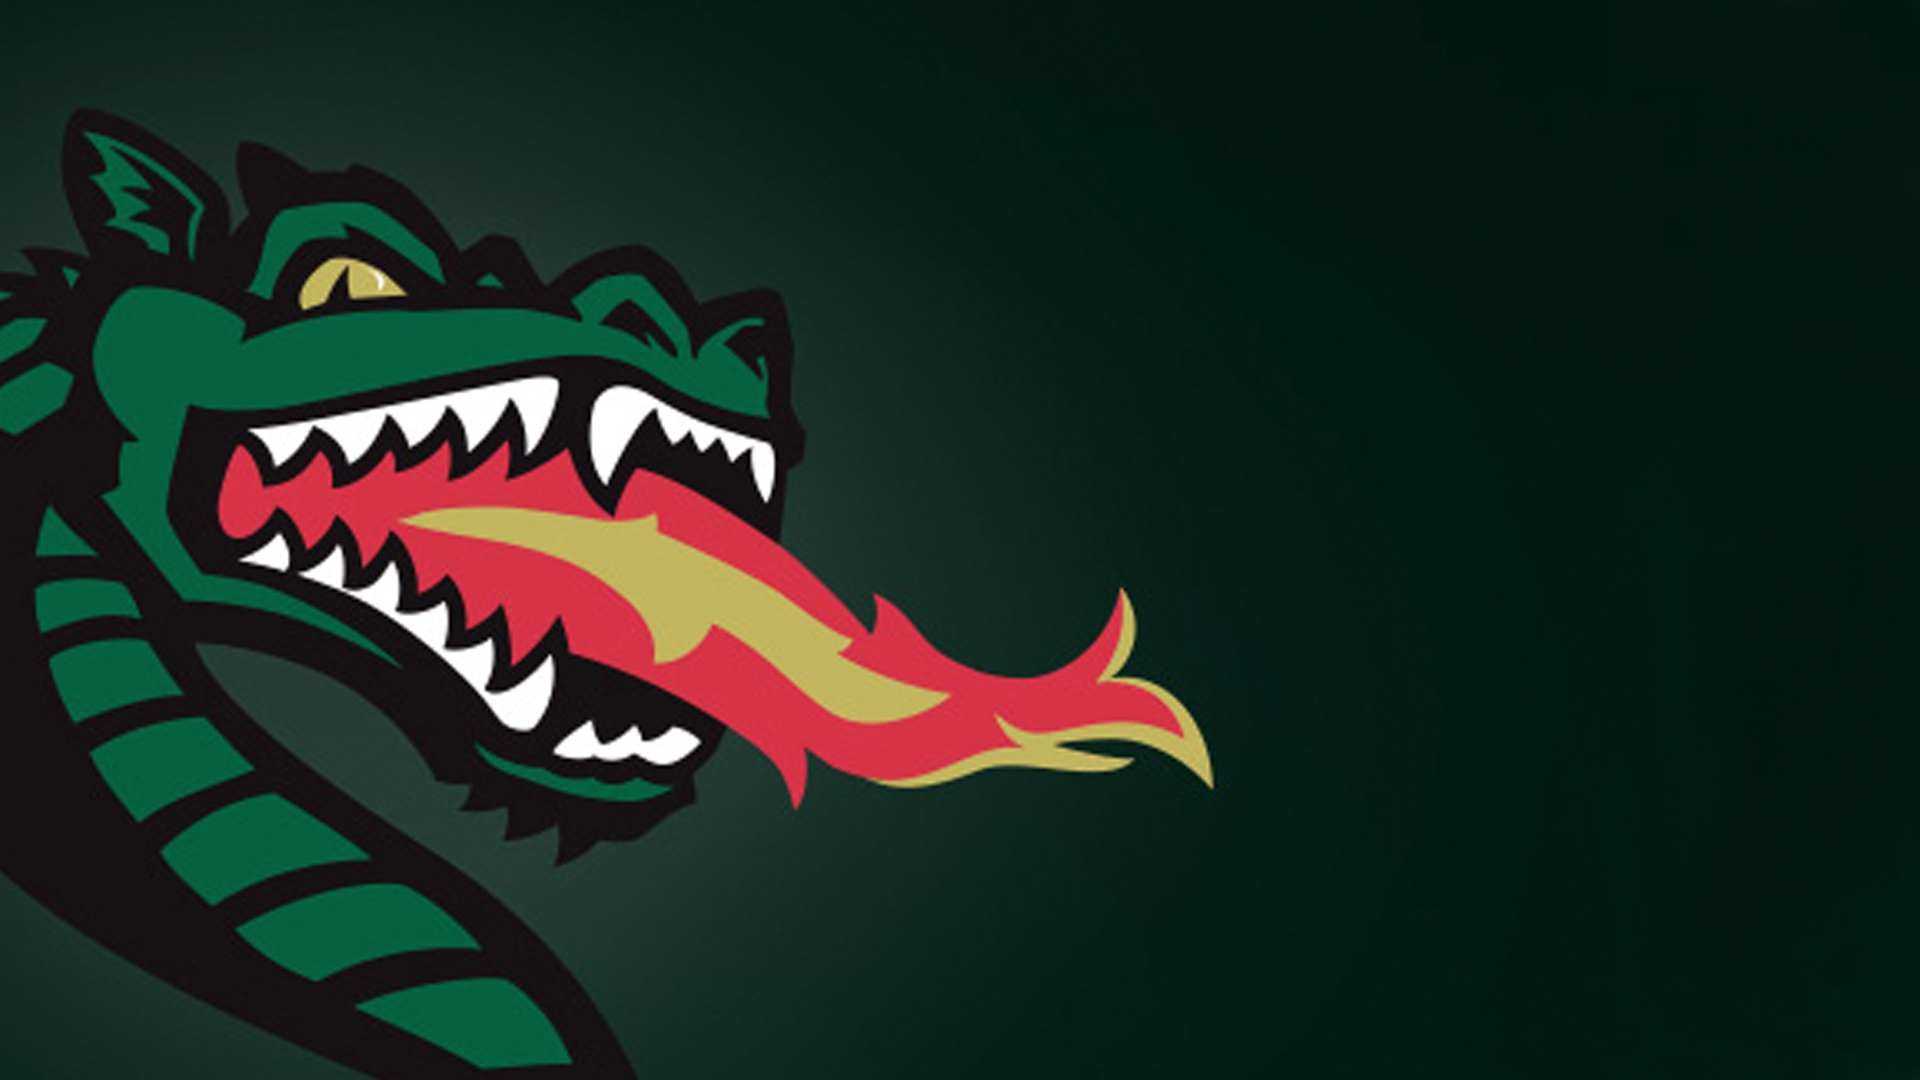 UAB Blazers, picture of Blaze, the fire breathing mascot